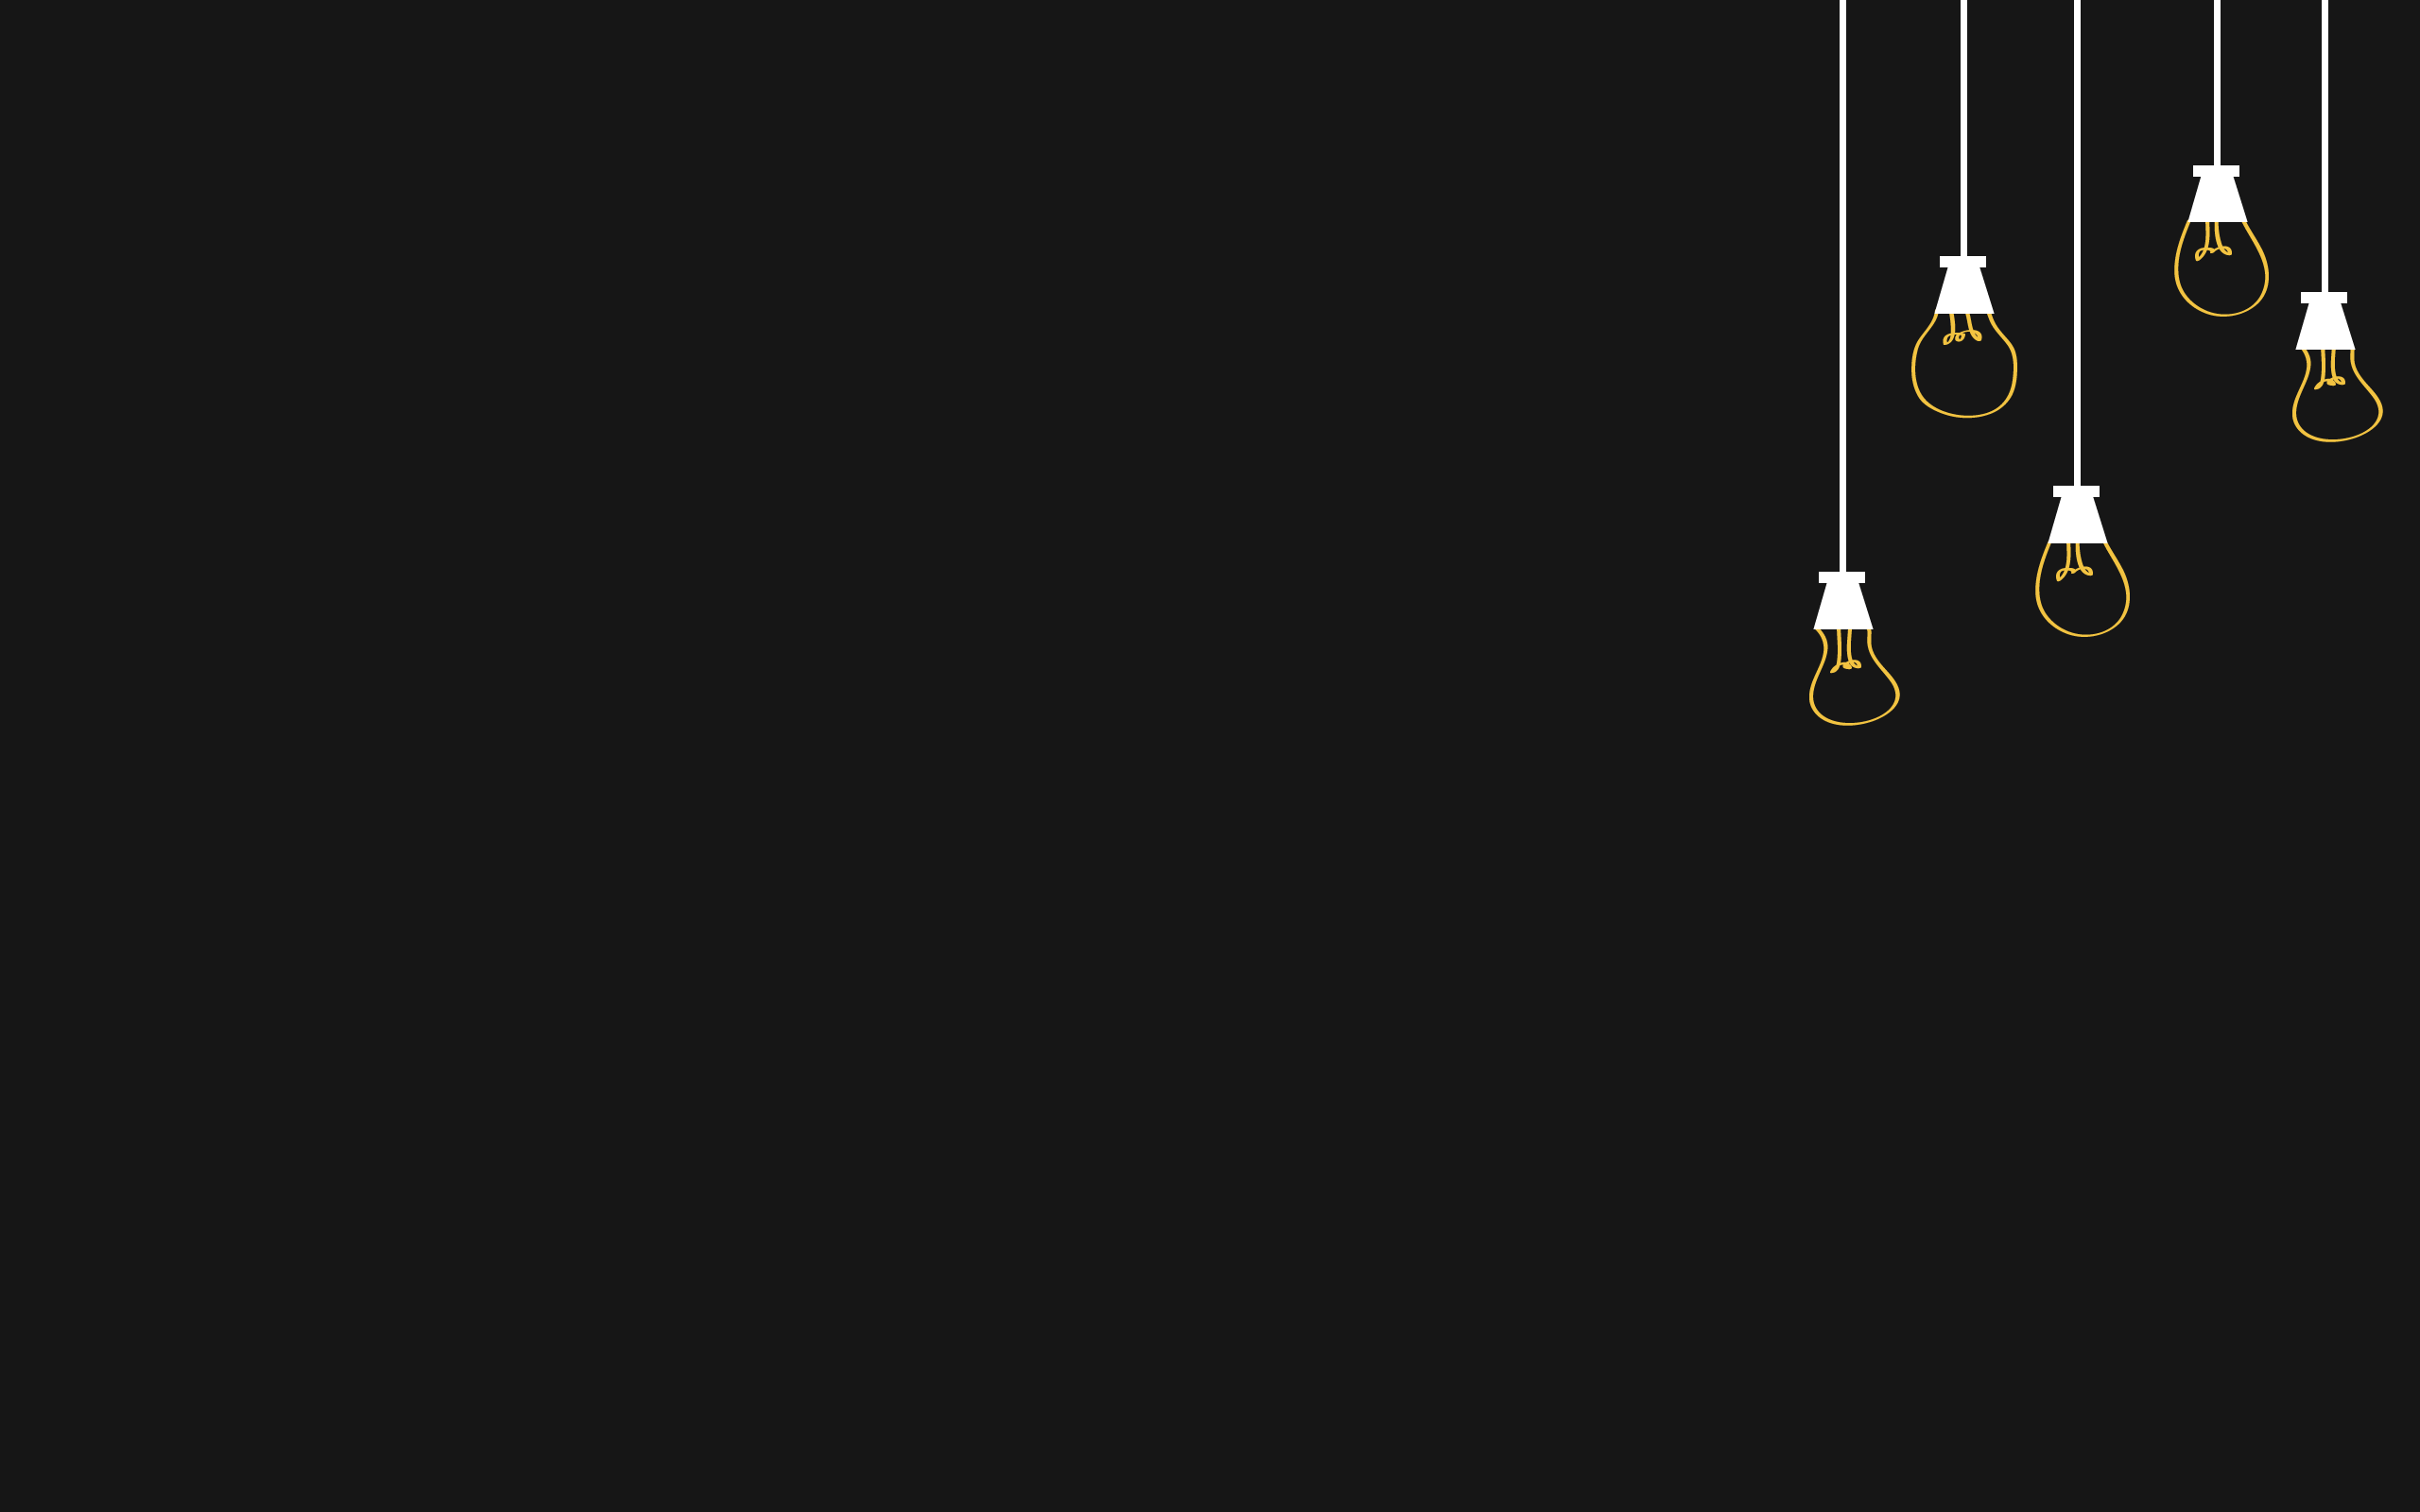 A row of light bulbs, one of which is glowing, against a black background - 2560x1600, computer, simple